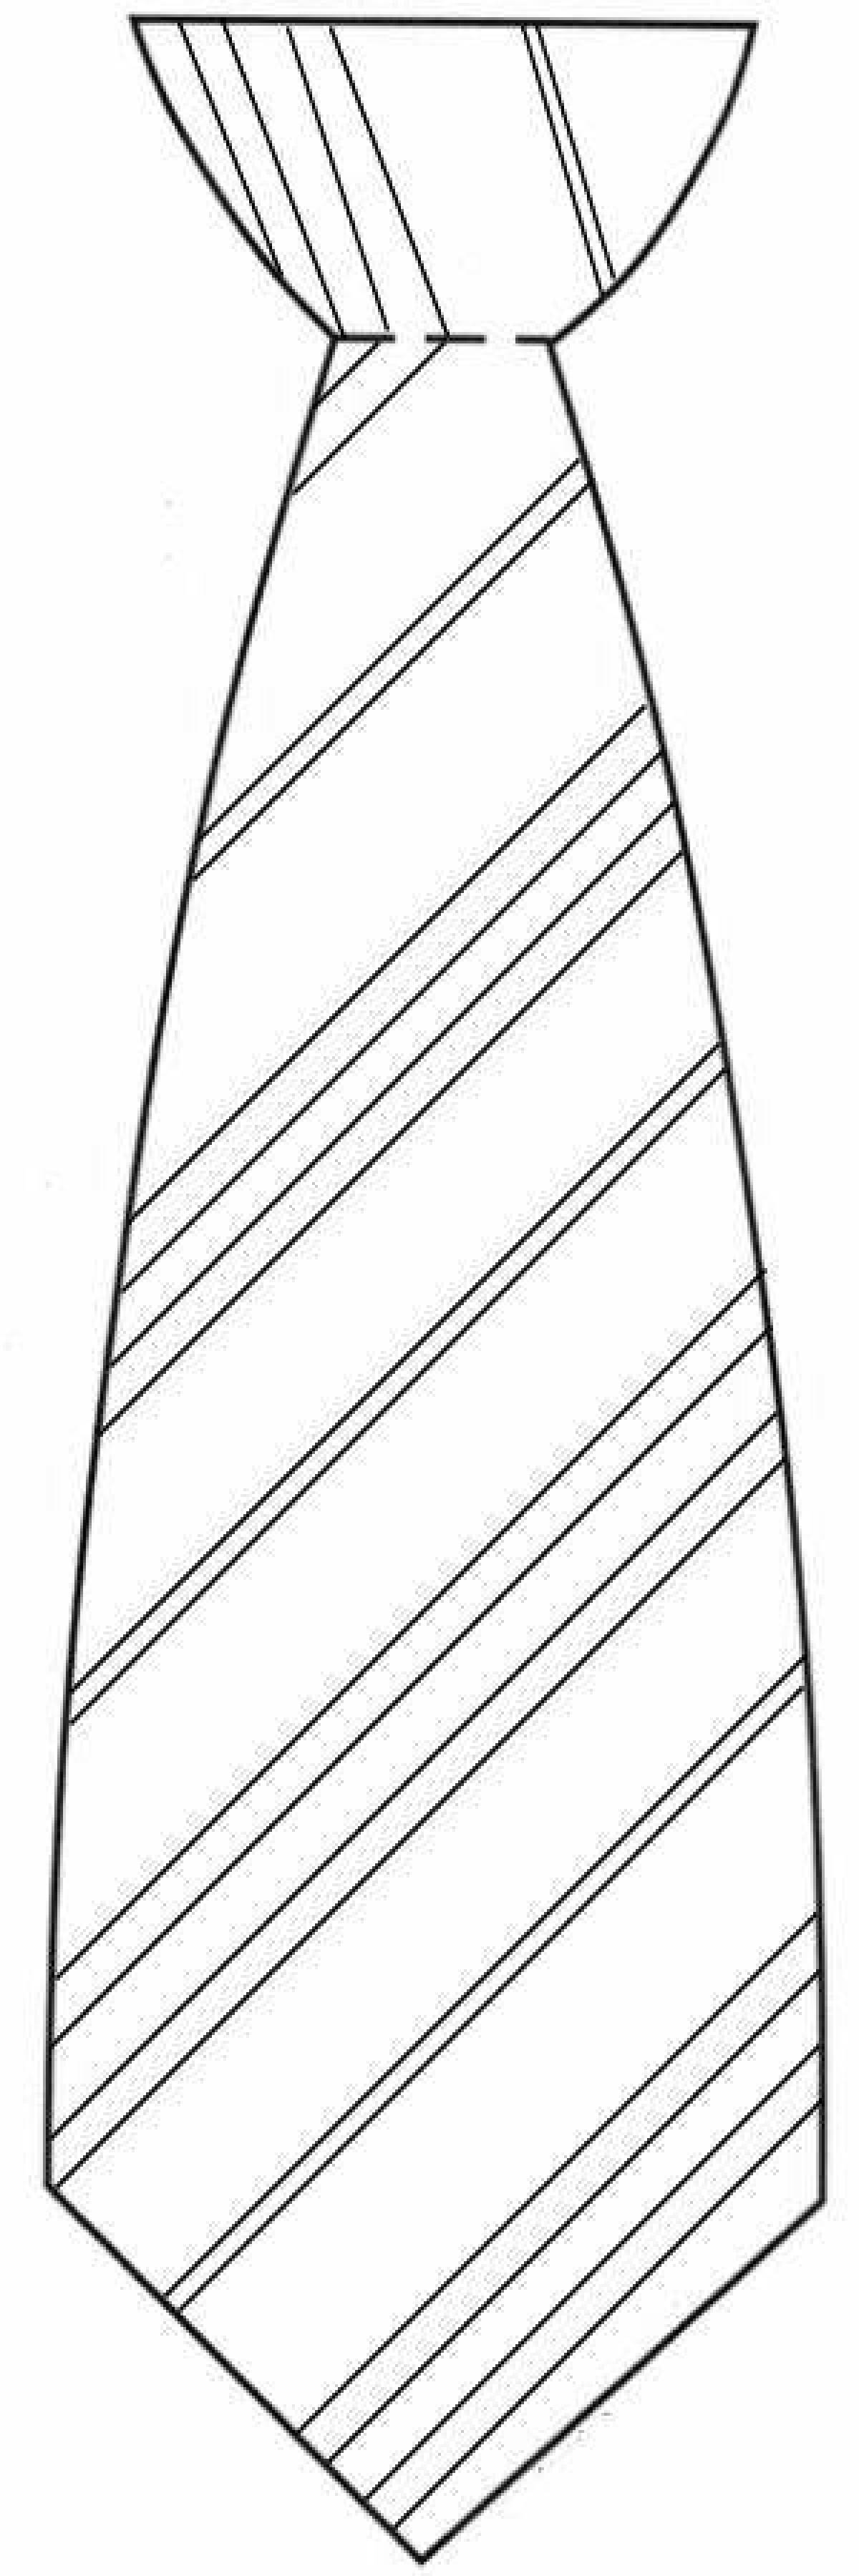 Playful tie coloring page